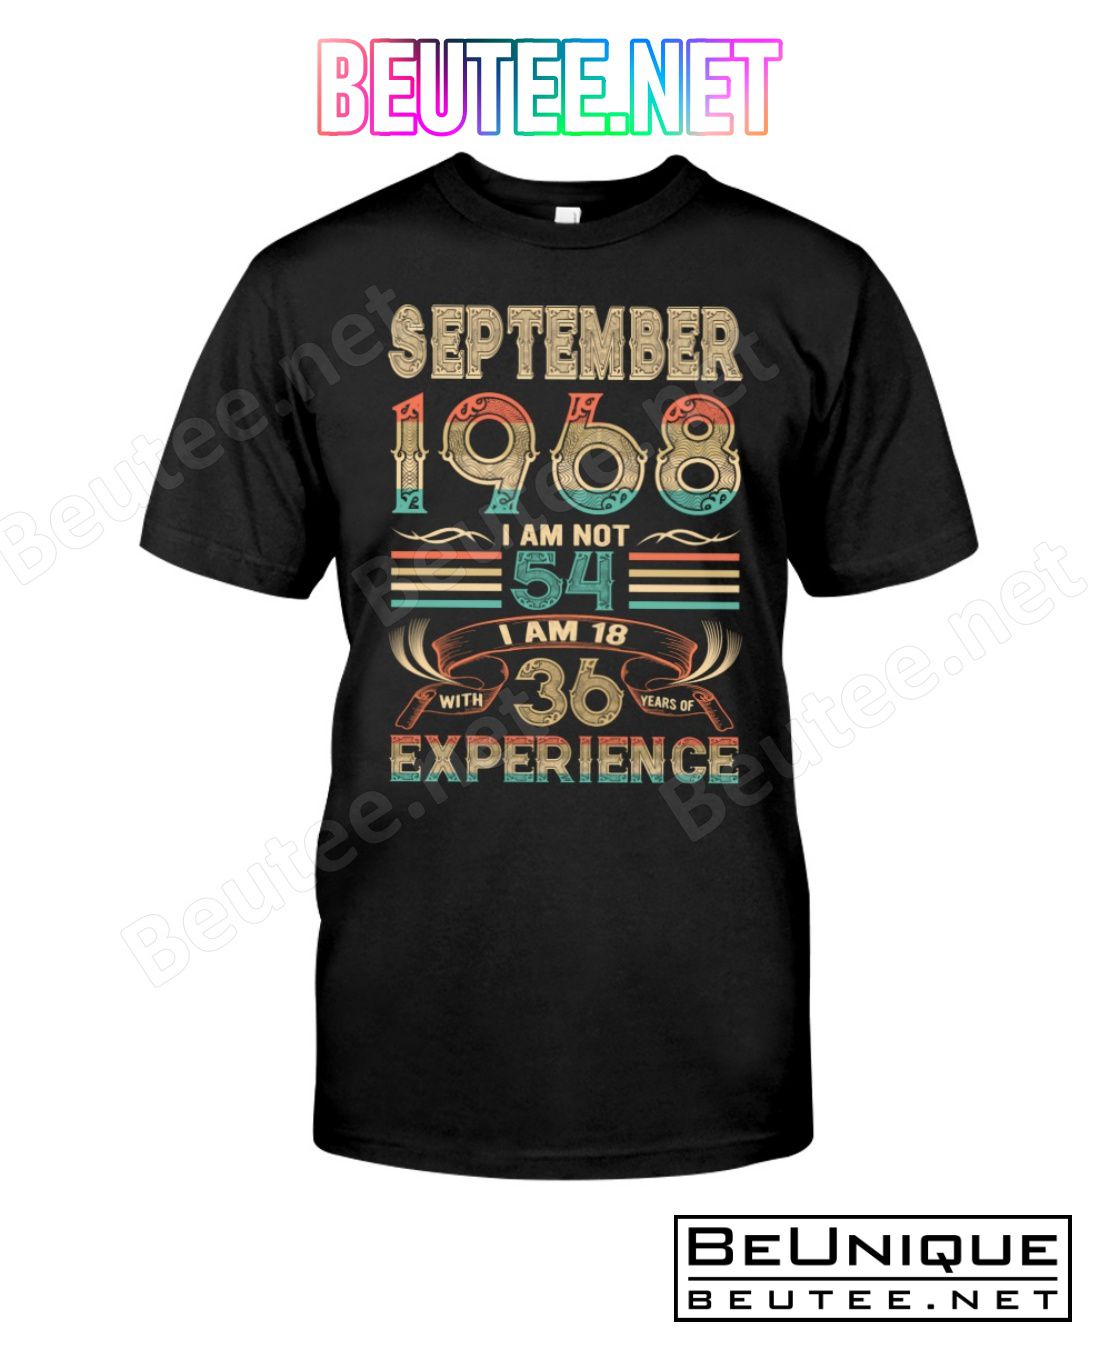 September 1968 I Am Not 54 I Am 18 With 35 Years Of Experience Birthday Gift Shirt